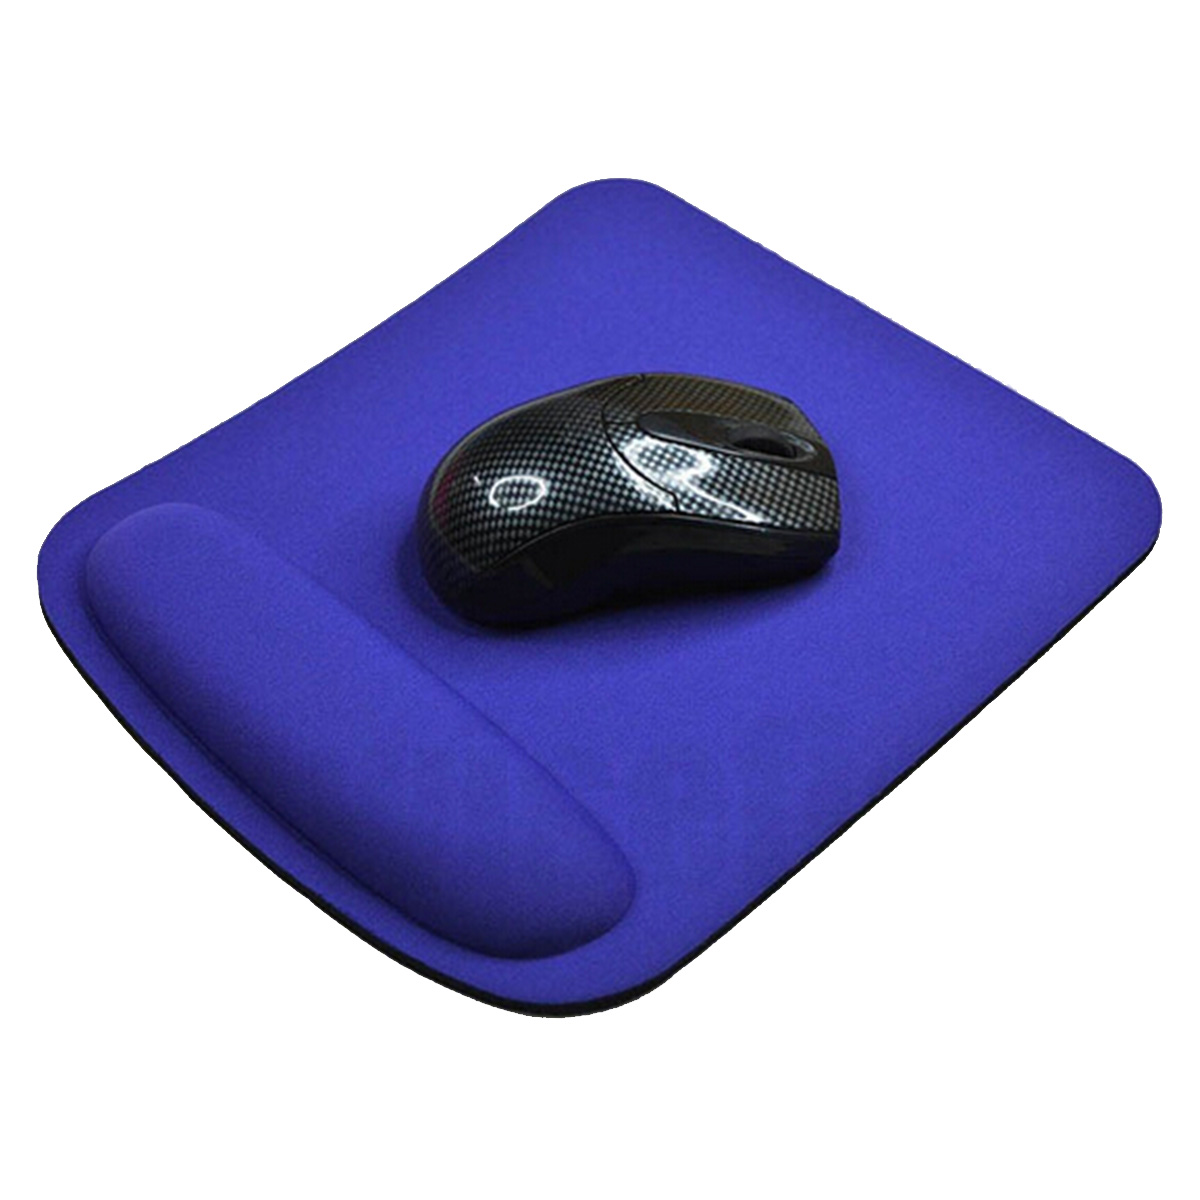 Optical Trackball PC Thicken Mouse Pad Support Wrist Comfort Mouse Pad Mat Mice